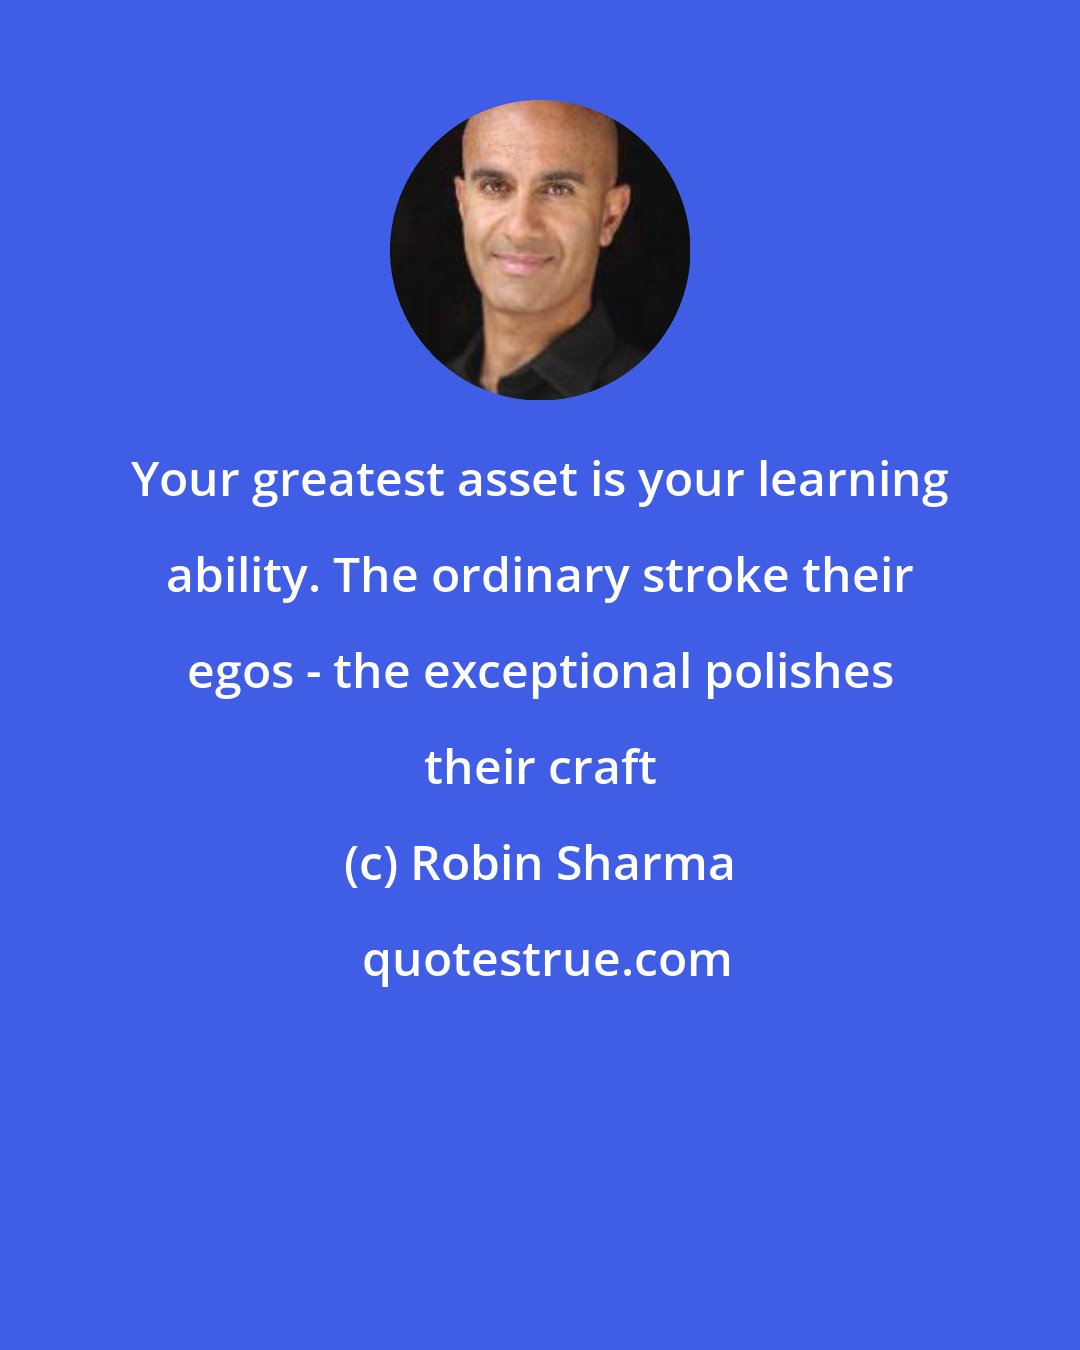 Robin Sharma: Your greatest asset is your learning ability. The ordinary stroke their egos - the exceptional polishes their craft